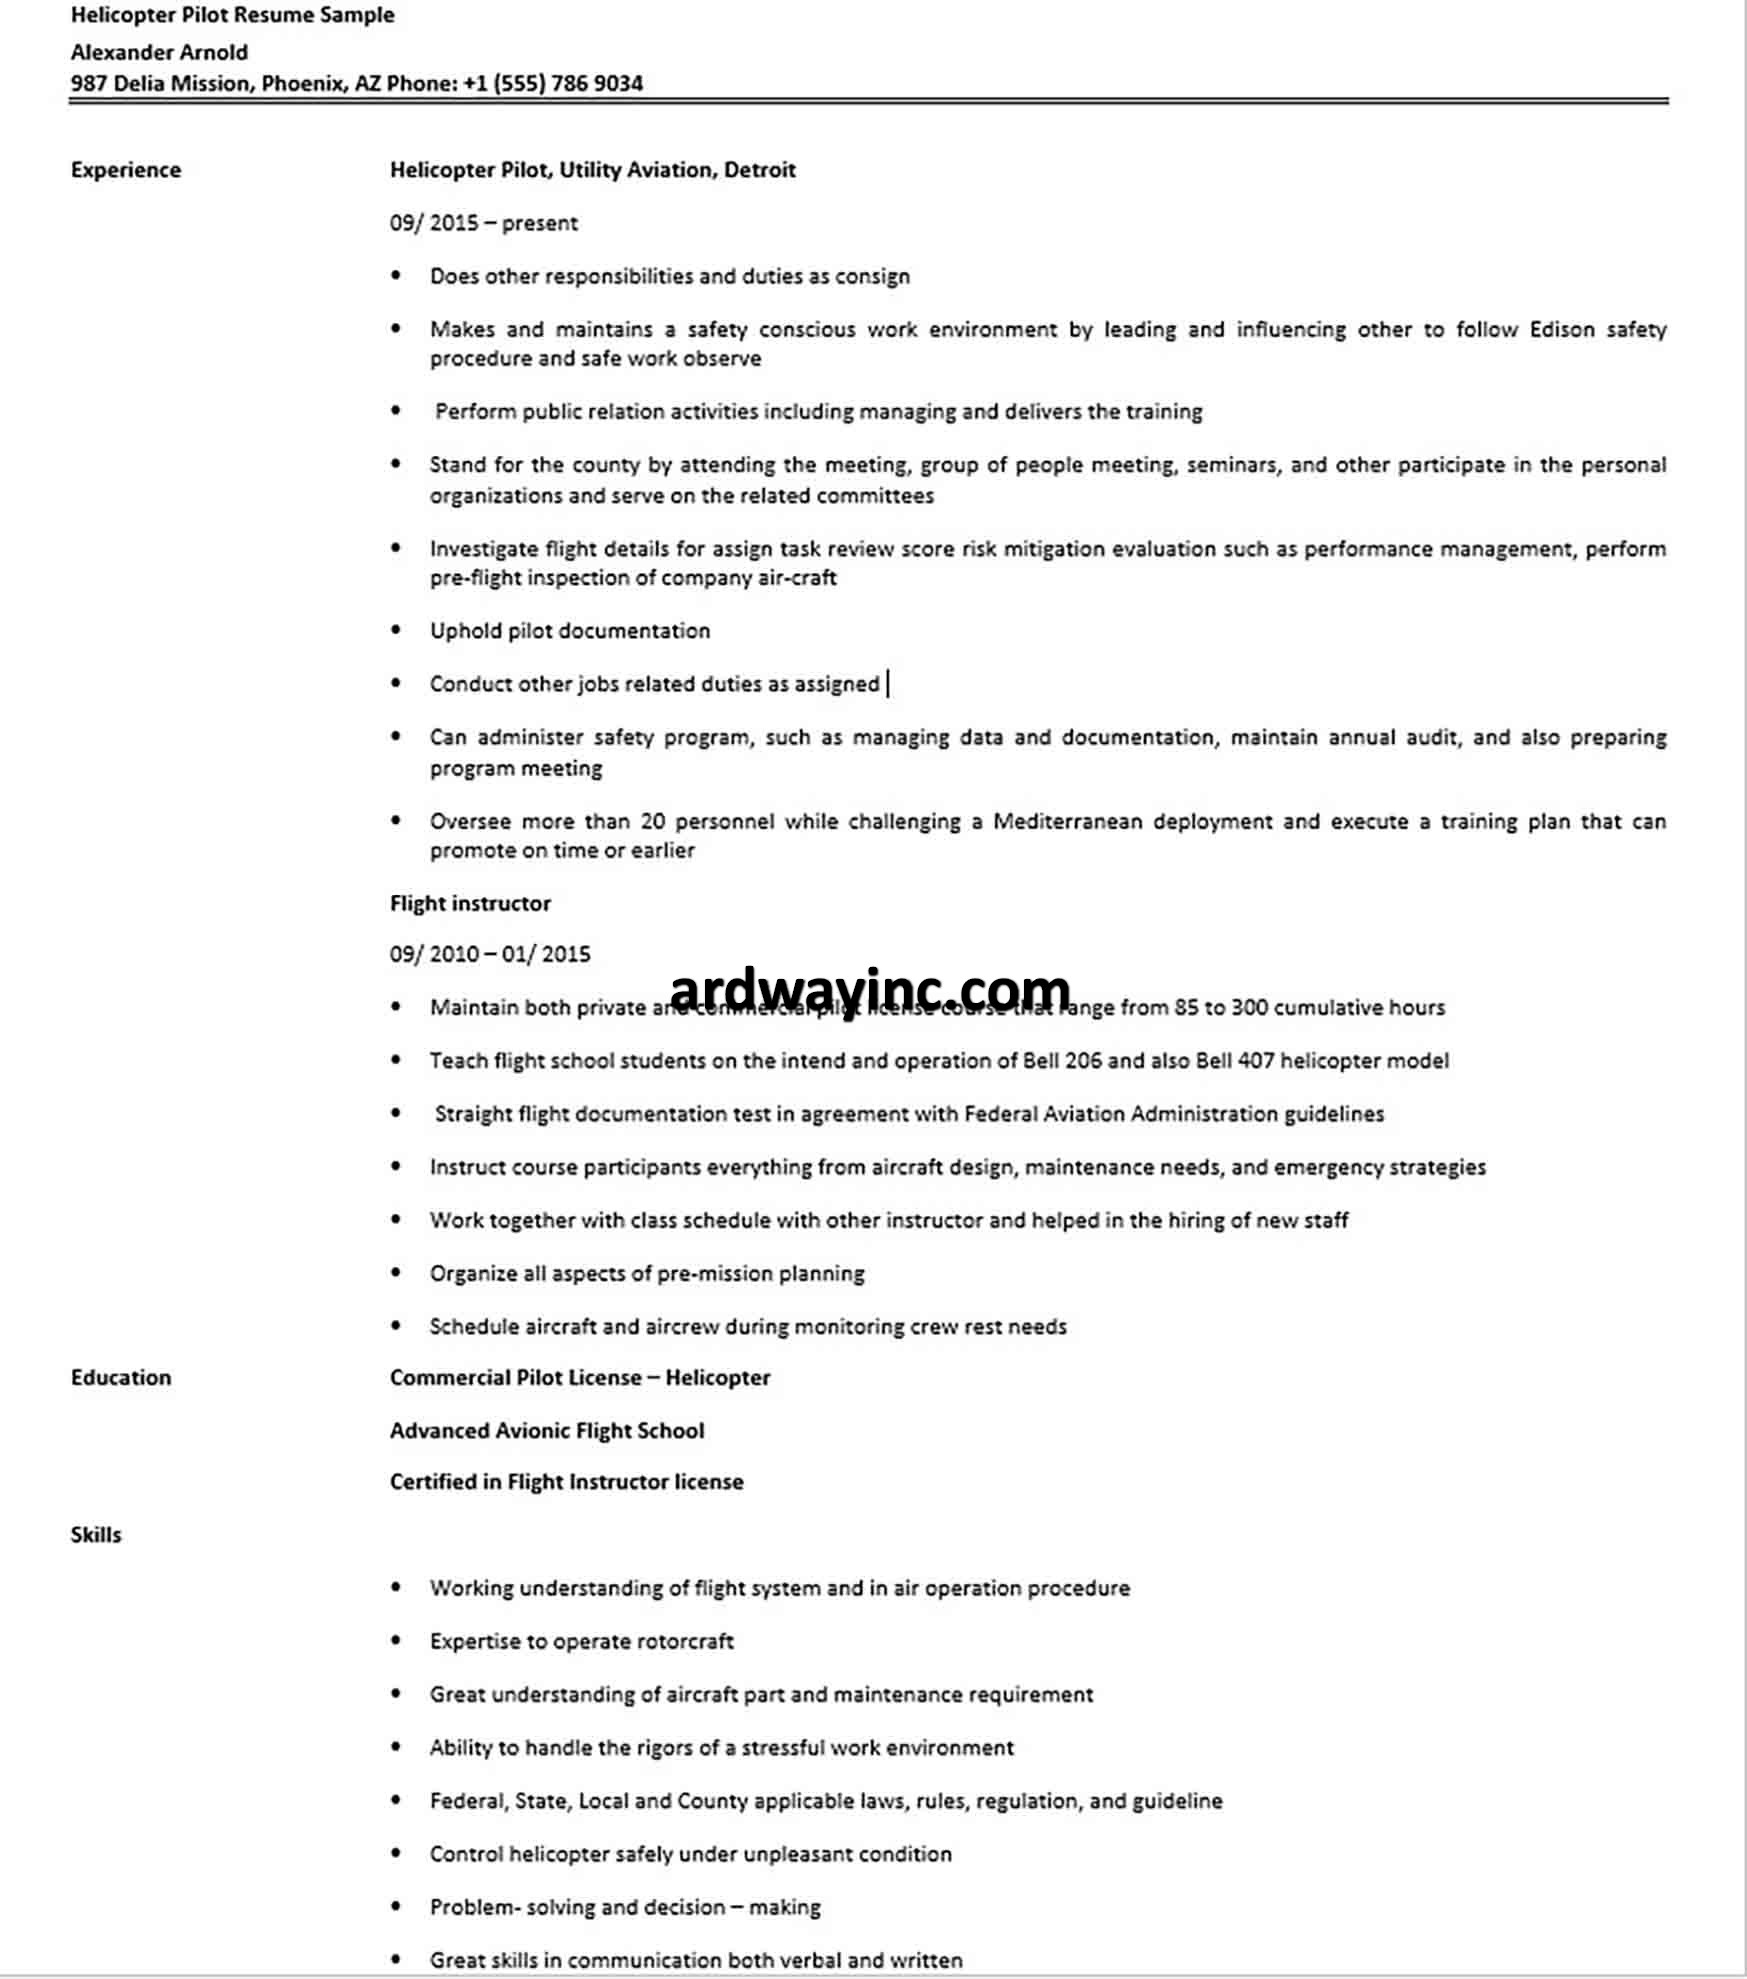 Helicopter Pilot Resume Sample